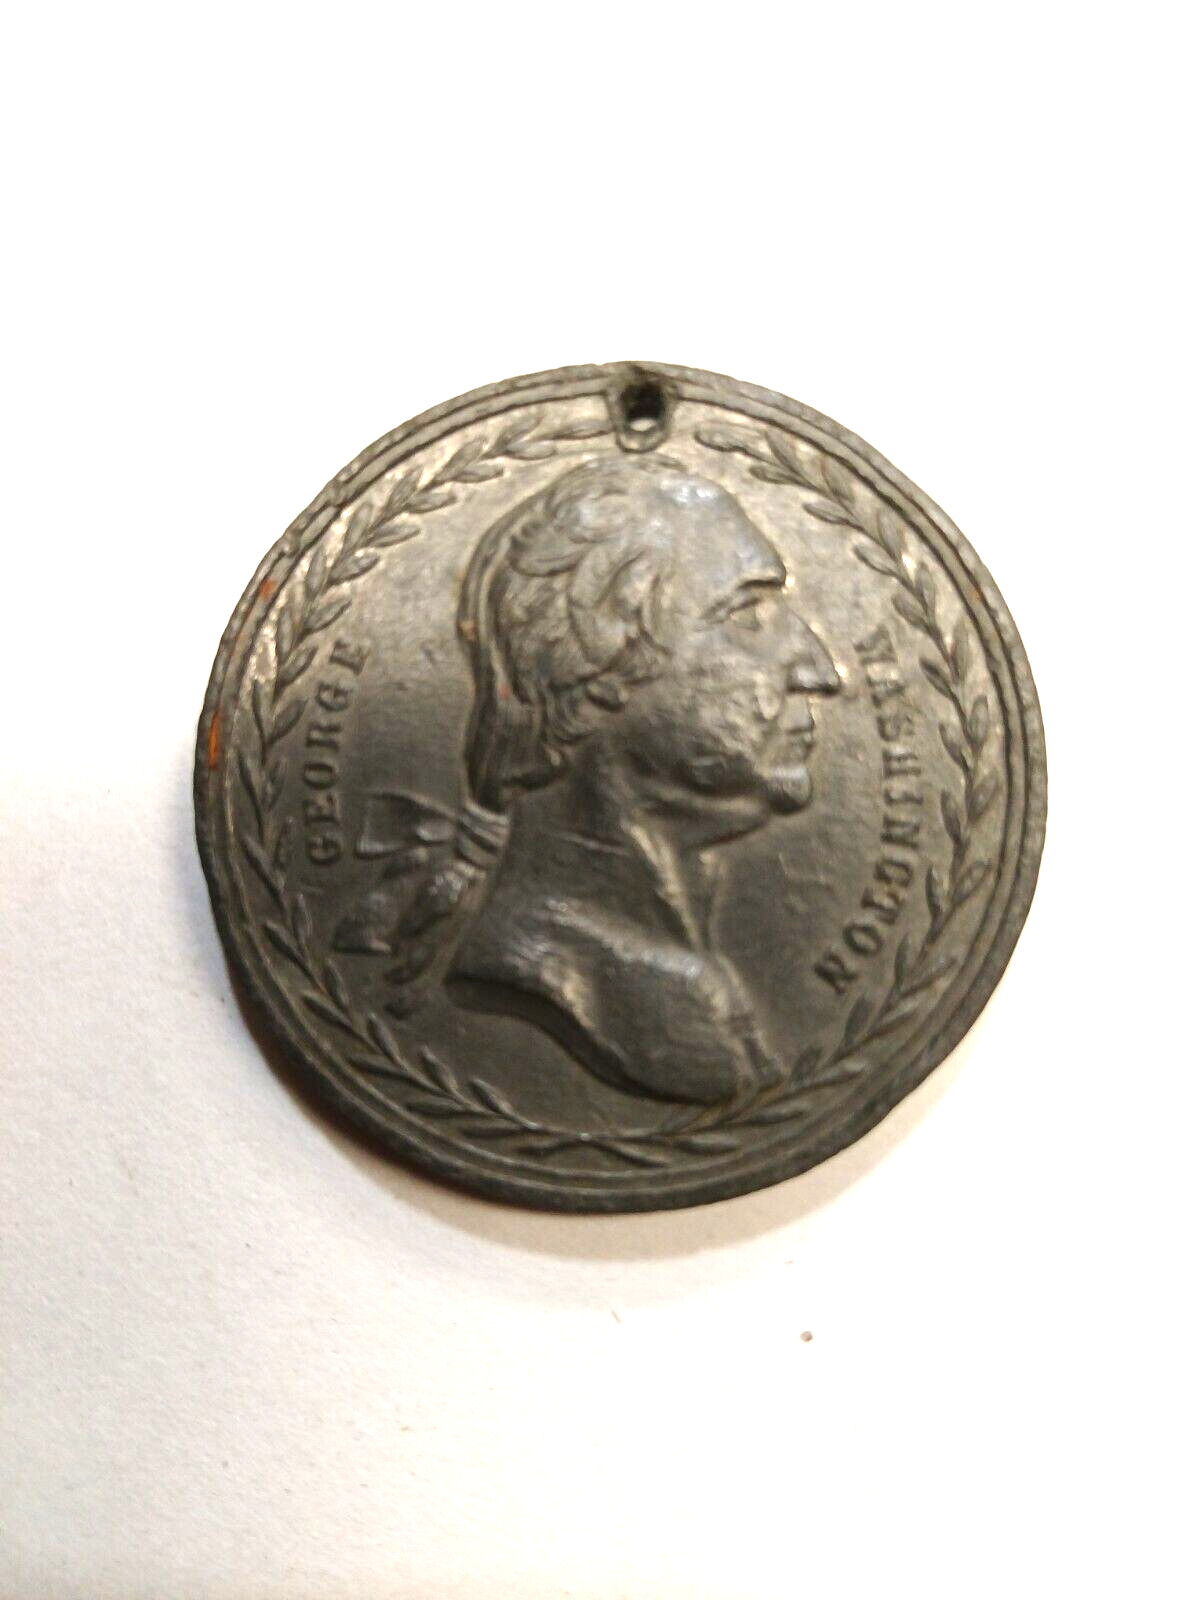 Vintage George Washington Centinial Medallion 1789 Not Cleaned Rare